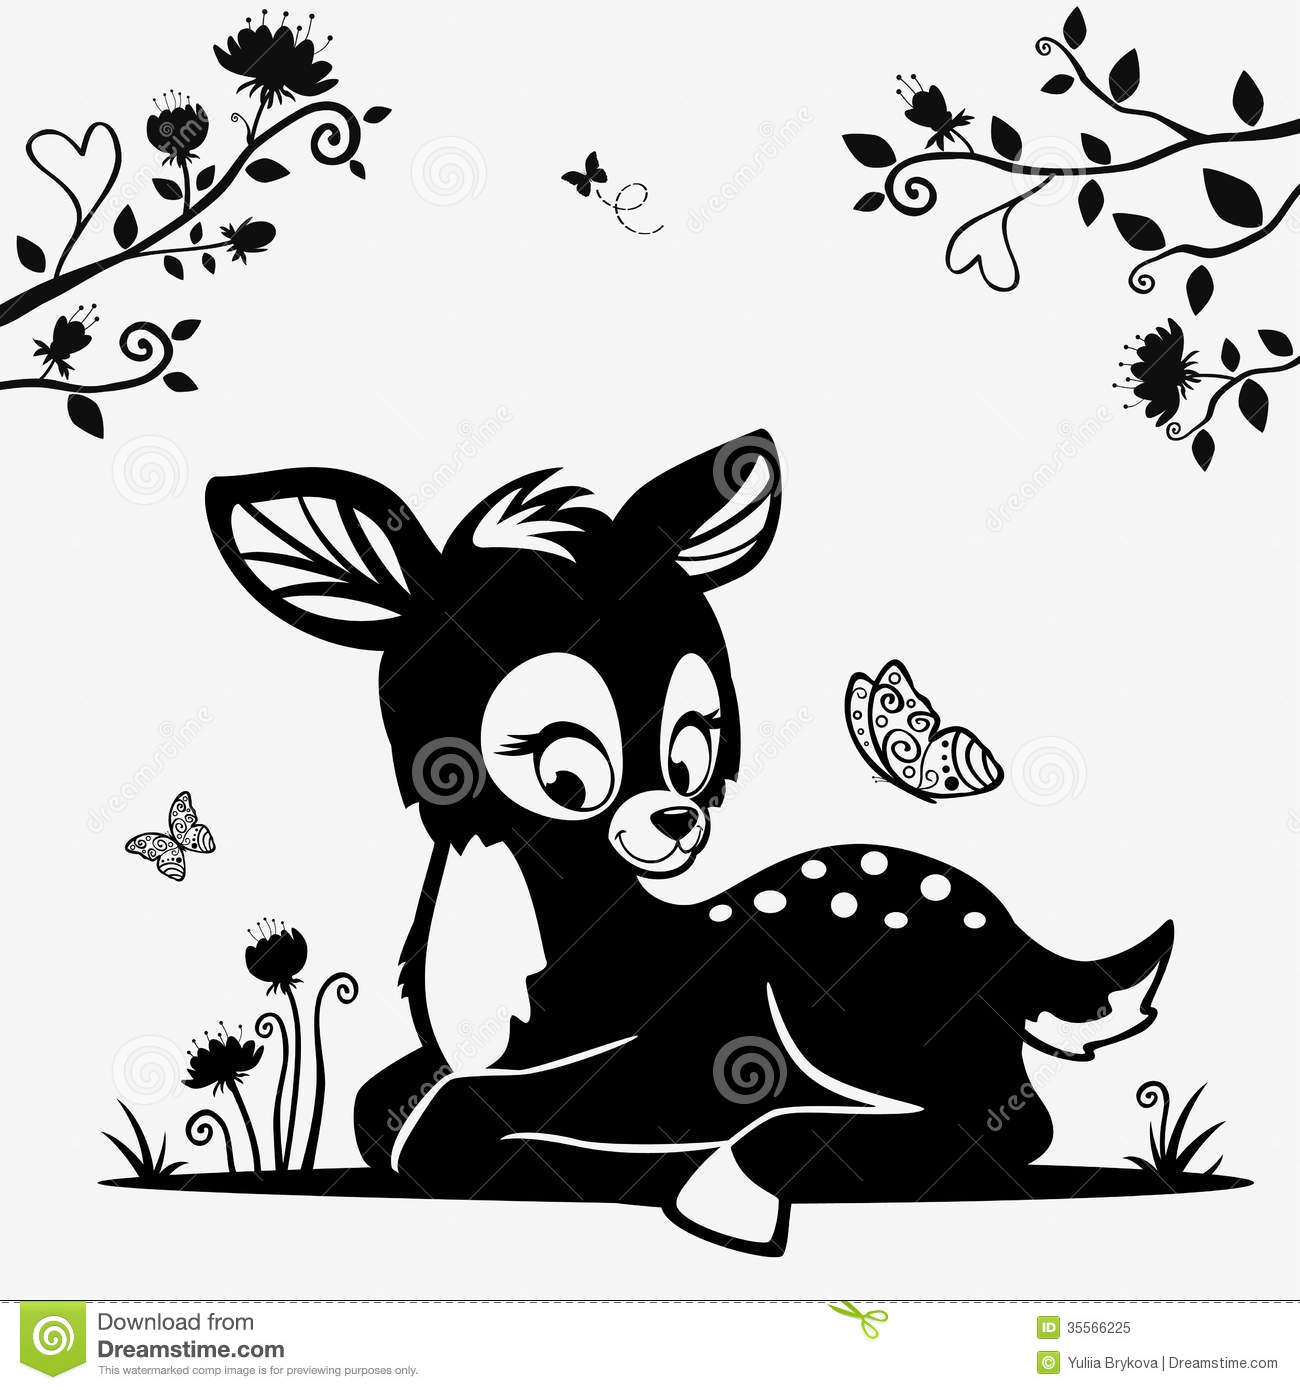 Silhouette Of A Cute Black And White Character Fawn 